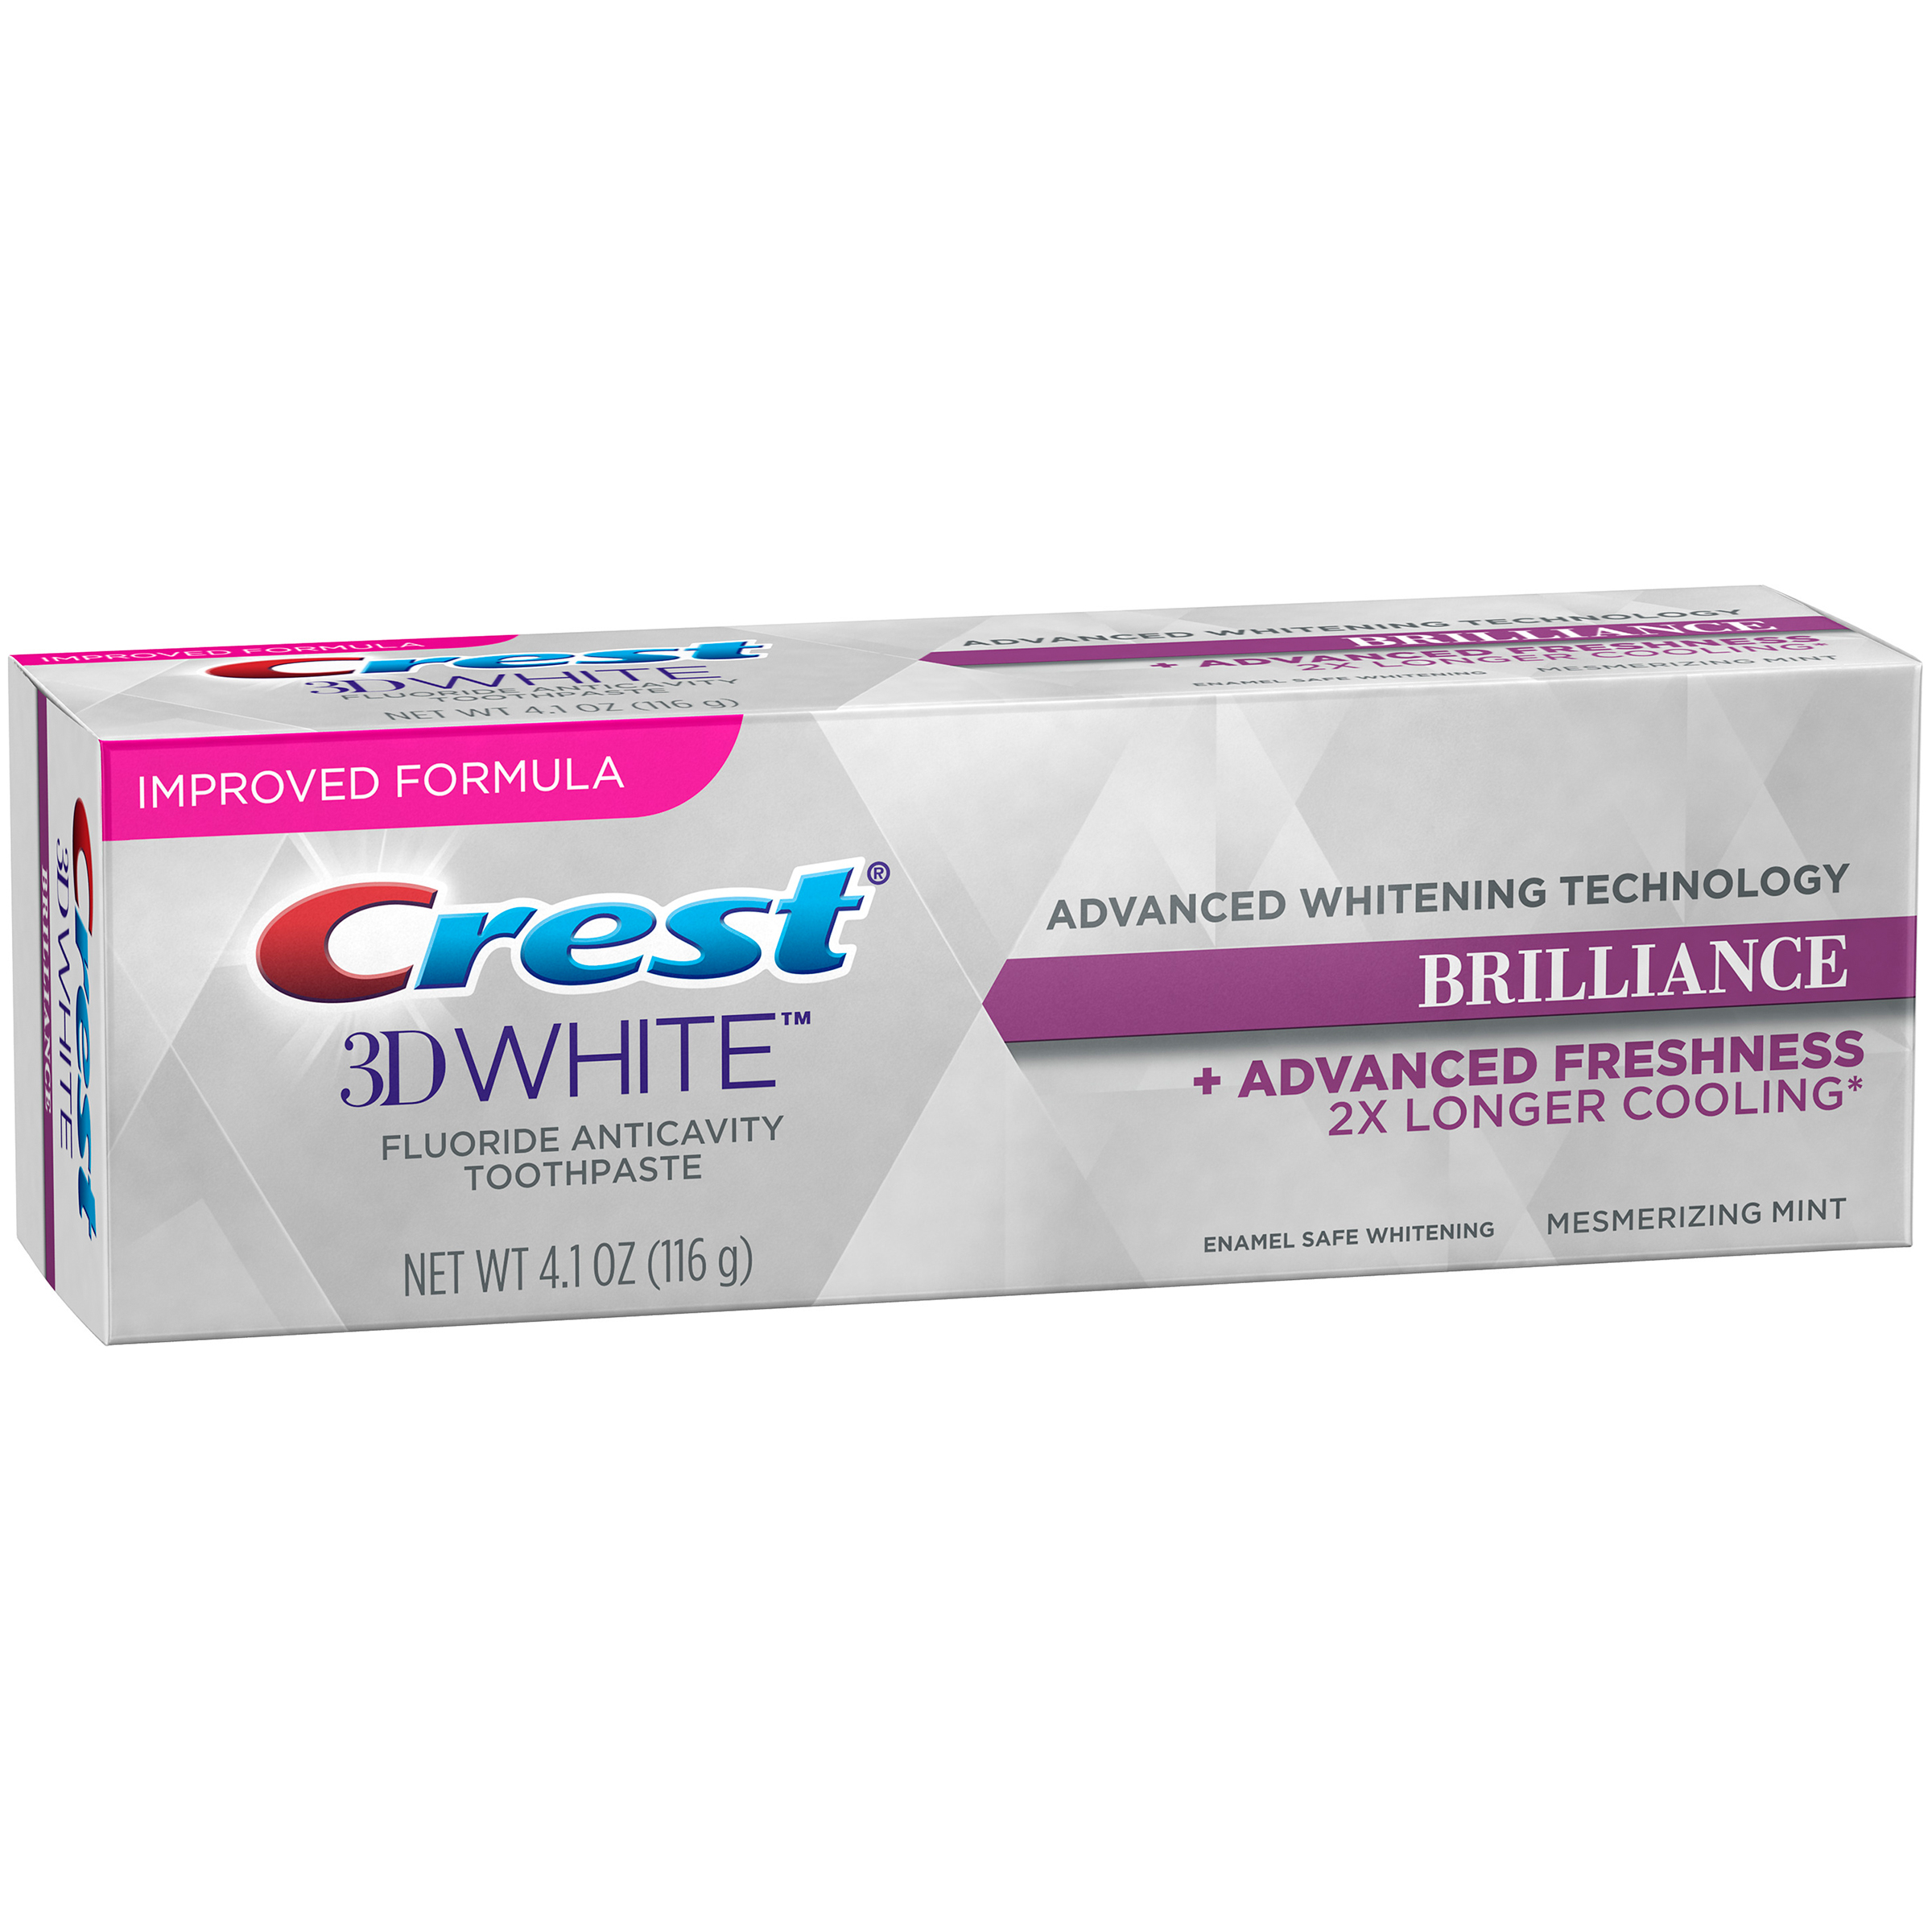 Crest 3D White Brilliance whitening toothpaste 2-pack for $5